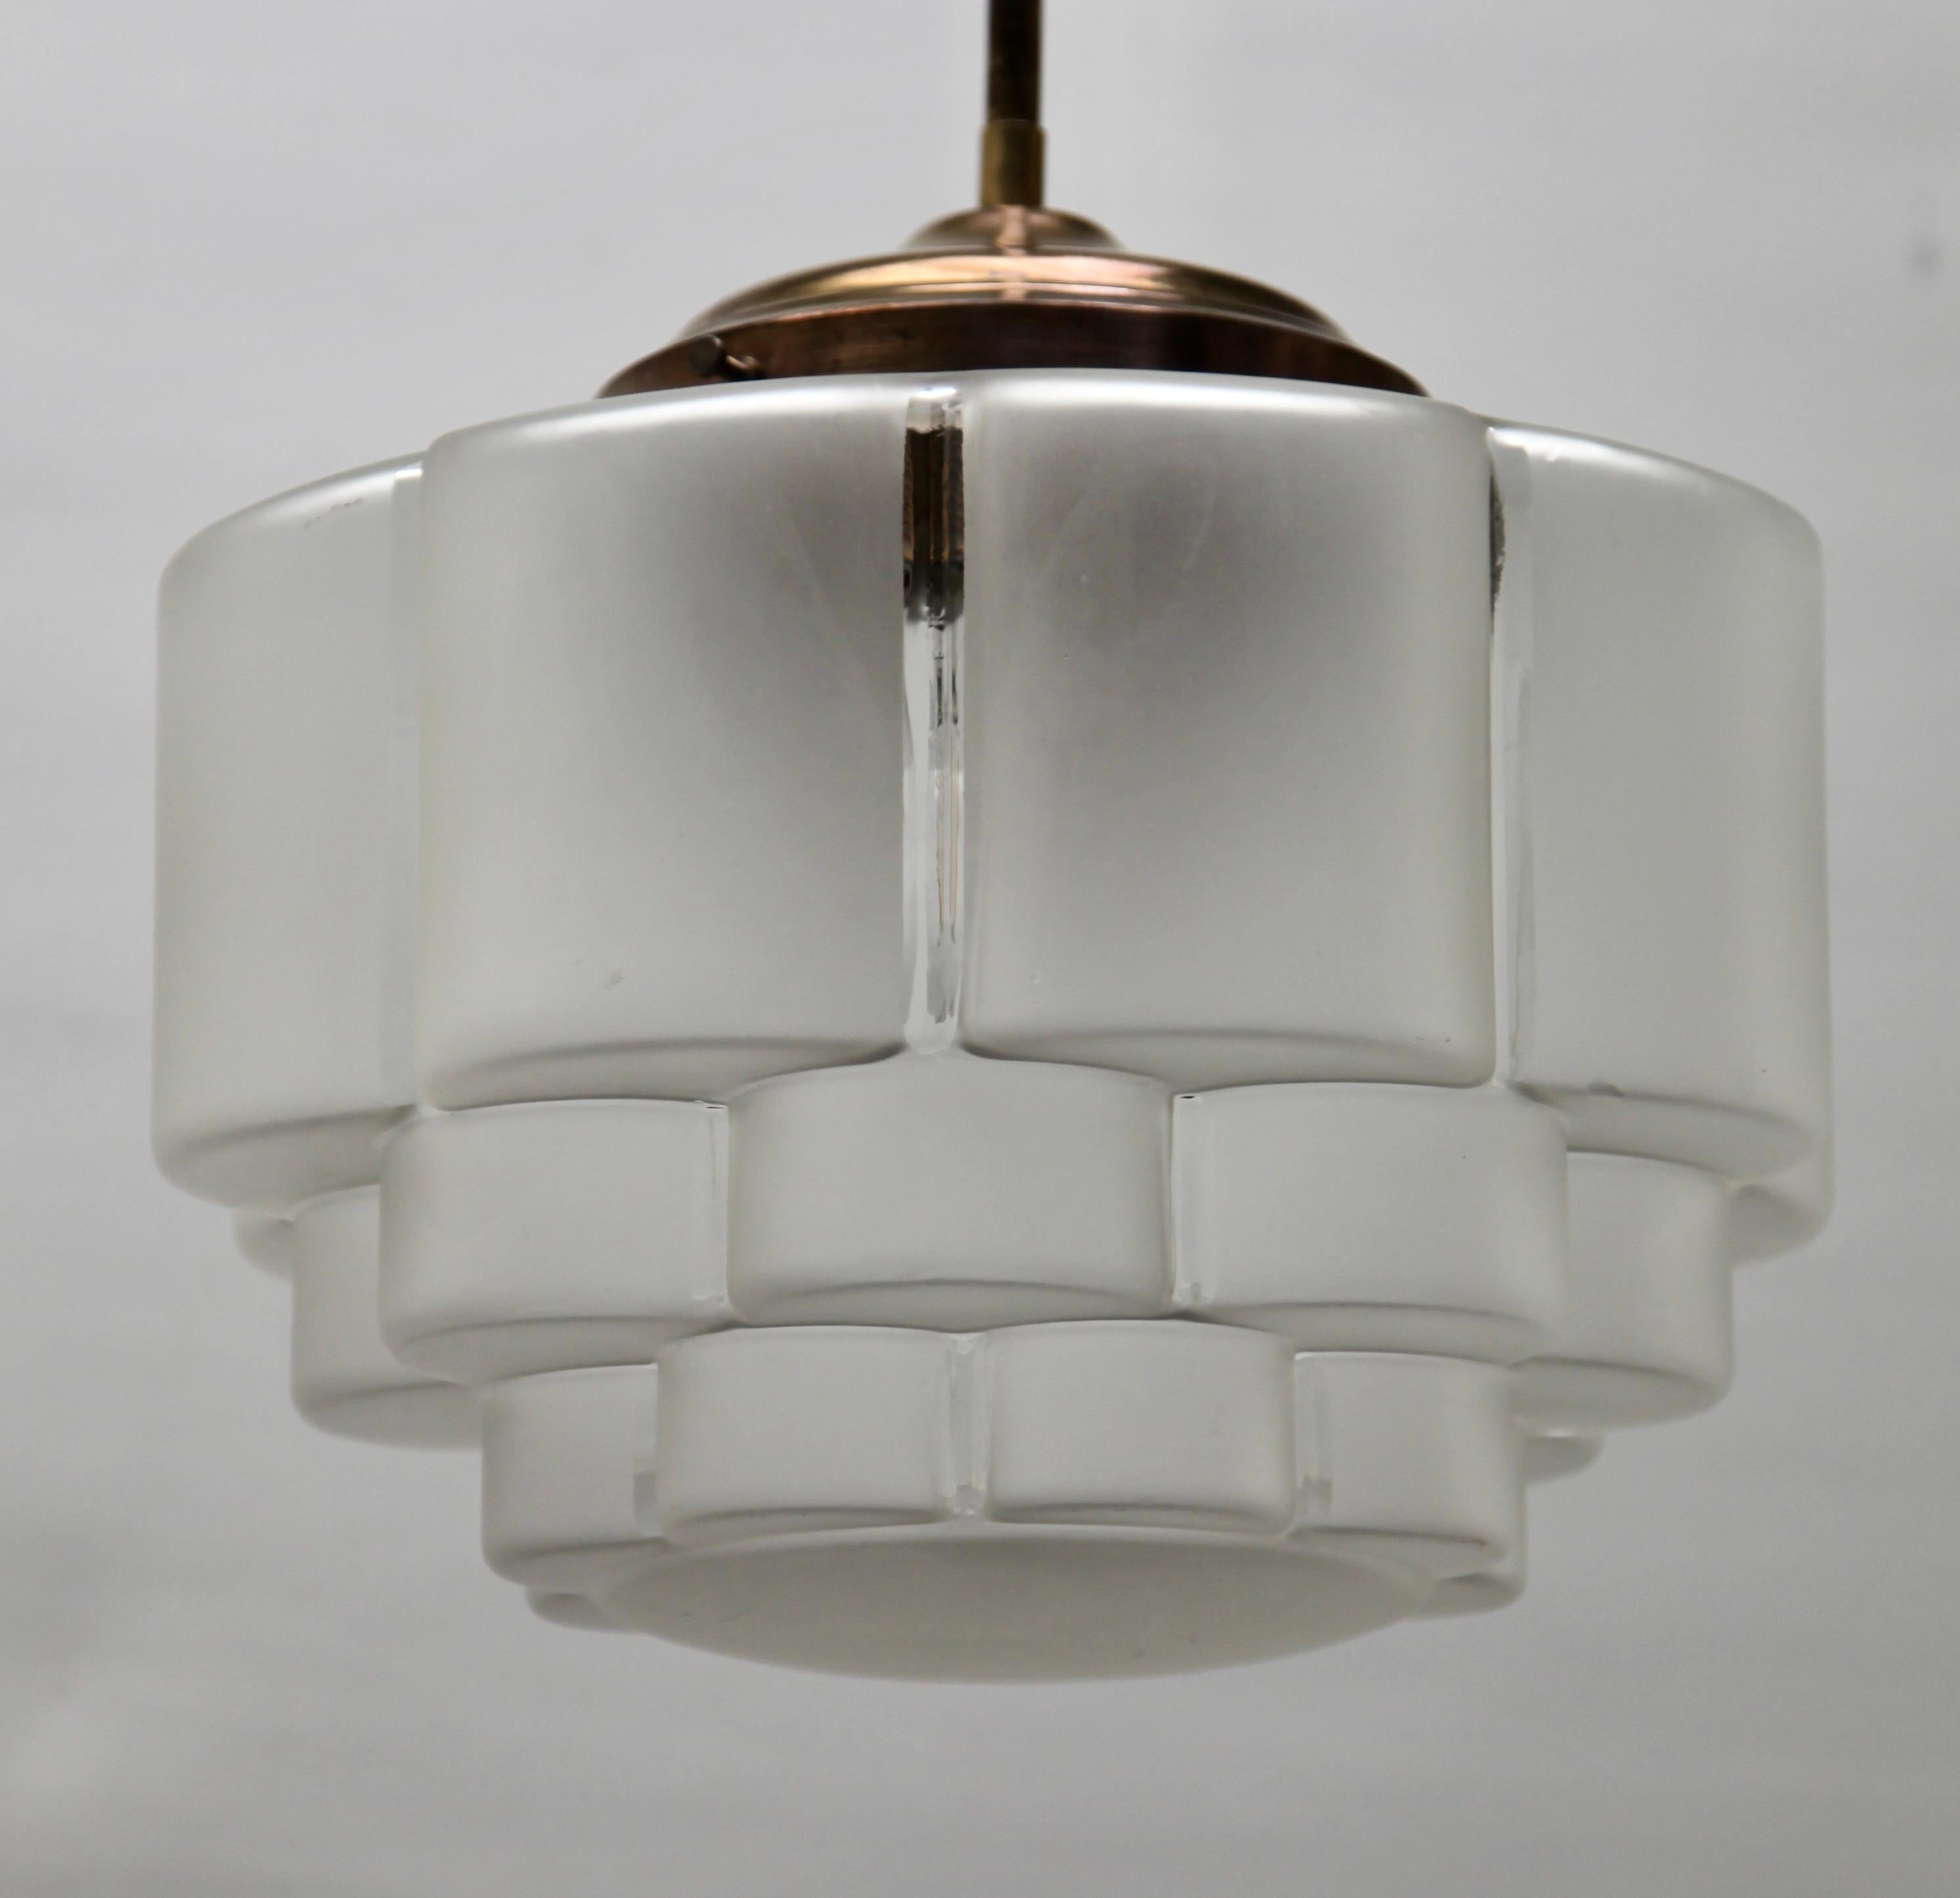 Large stepped satin glass and brass fittings pendant light, the 1930s

Provided with new fittings E27 max 60-watt Bulb
With original patina on brass parts.
In excellent condition and in full working order. 
And safe for usage in the World.

Size